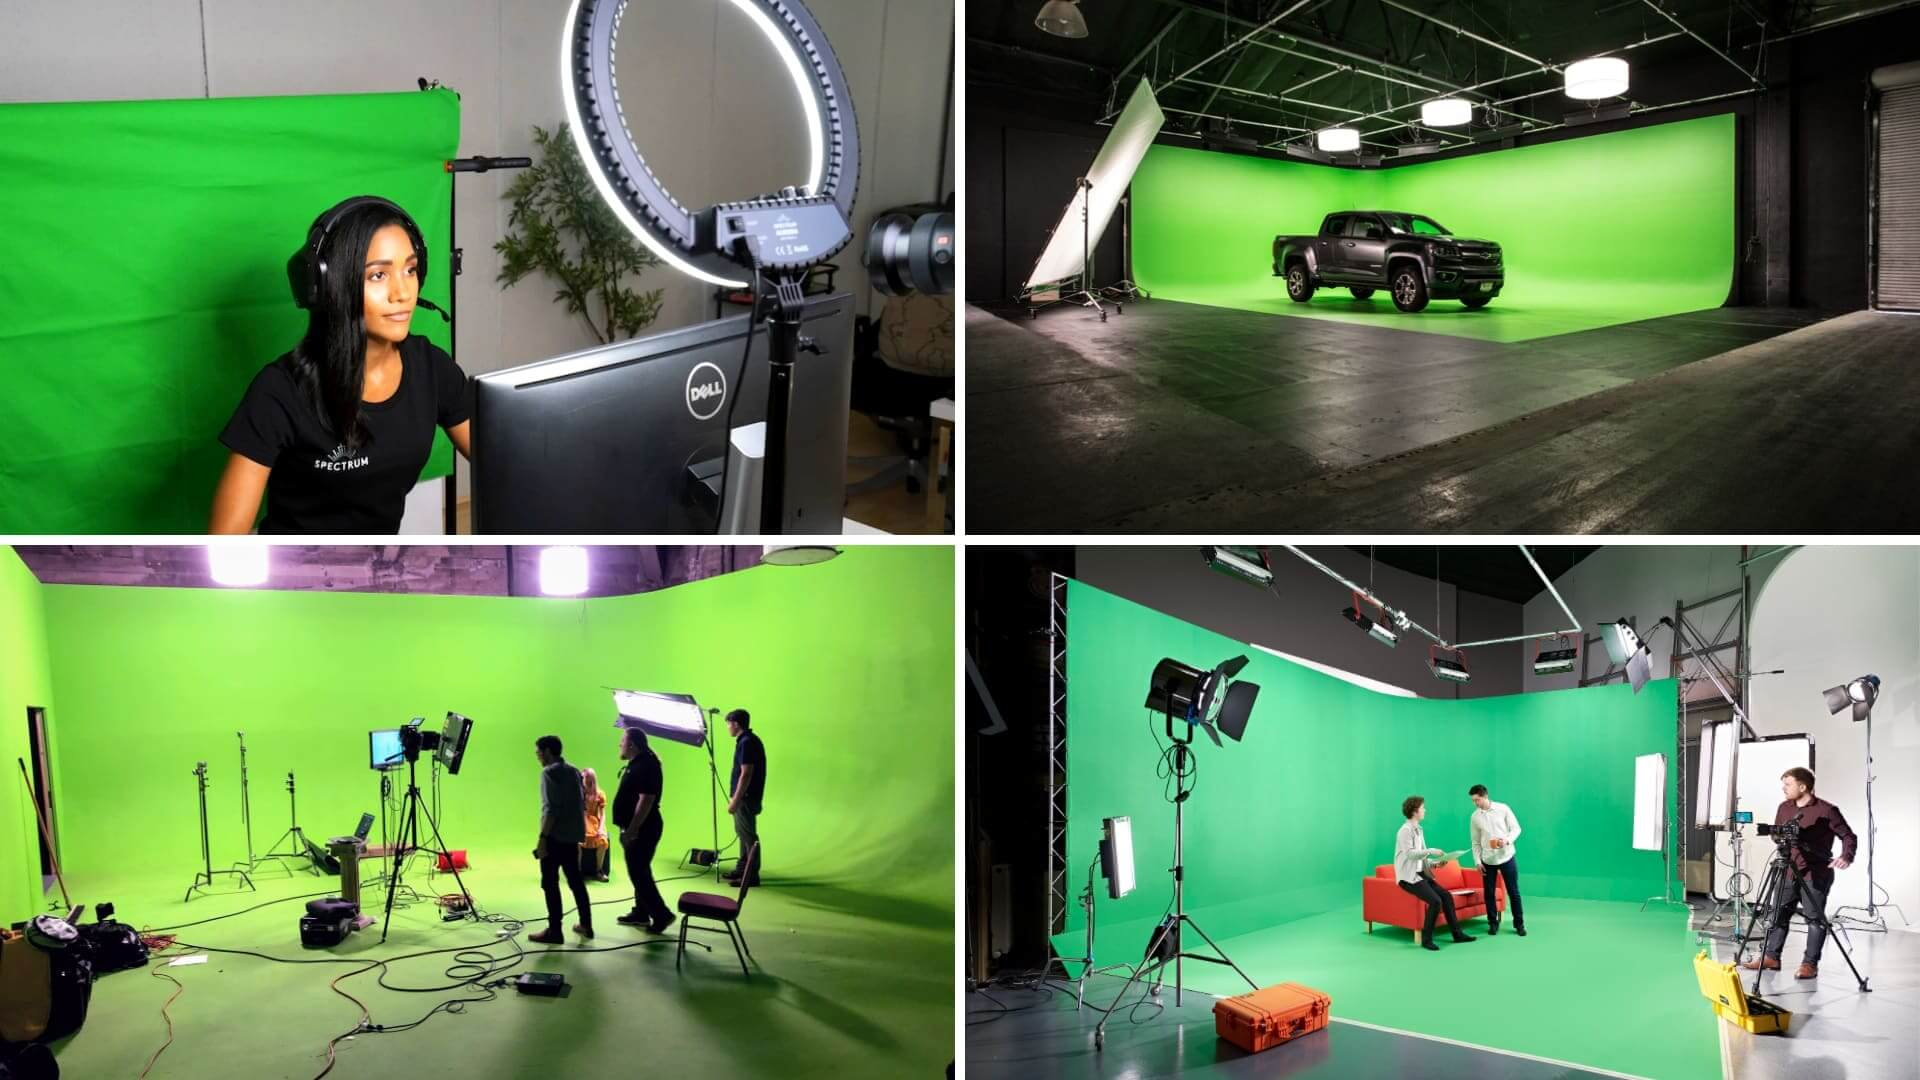 Tips for Shooting Video on Green Screen